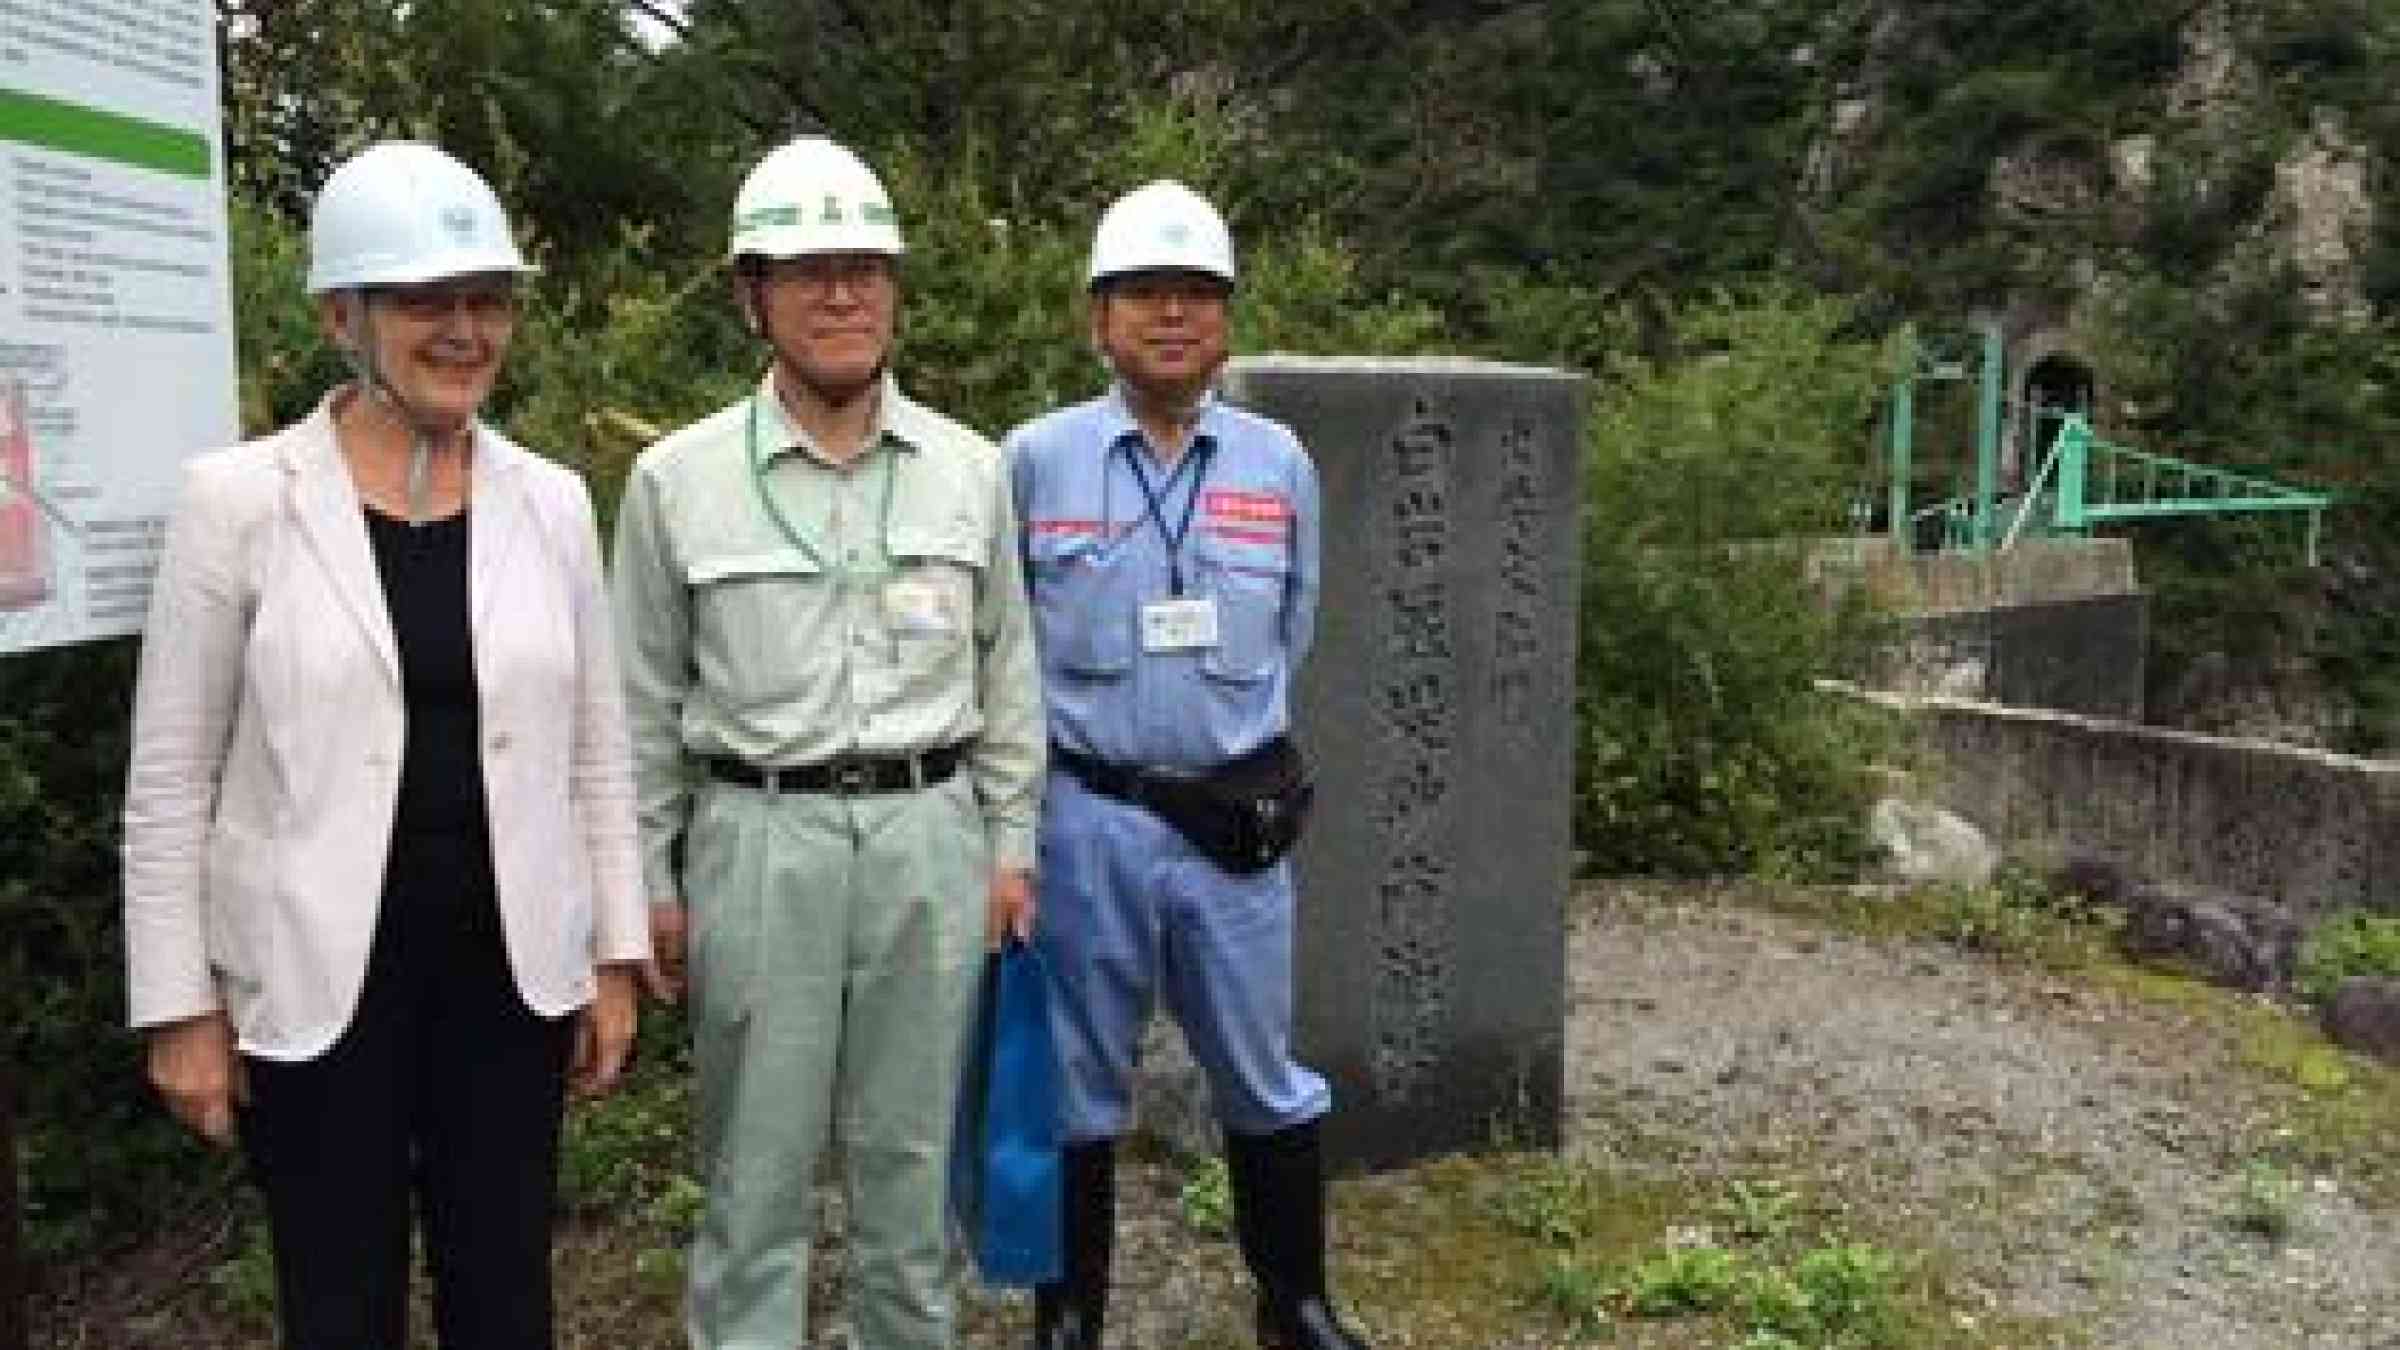 (From left) SRSG Ms. Margareta Wahlström, Mr. Masayuki Hayashi from Toyama Prefectural government, and Mr. Mitsuo Fukuda from Ministry of Land, Infrastructure, and Transport in the area of the main Shiraiwa Sabo Dam in Tateyama Sabo Facilities. (Photo: UNISDR)